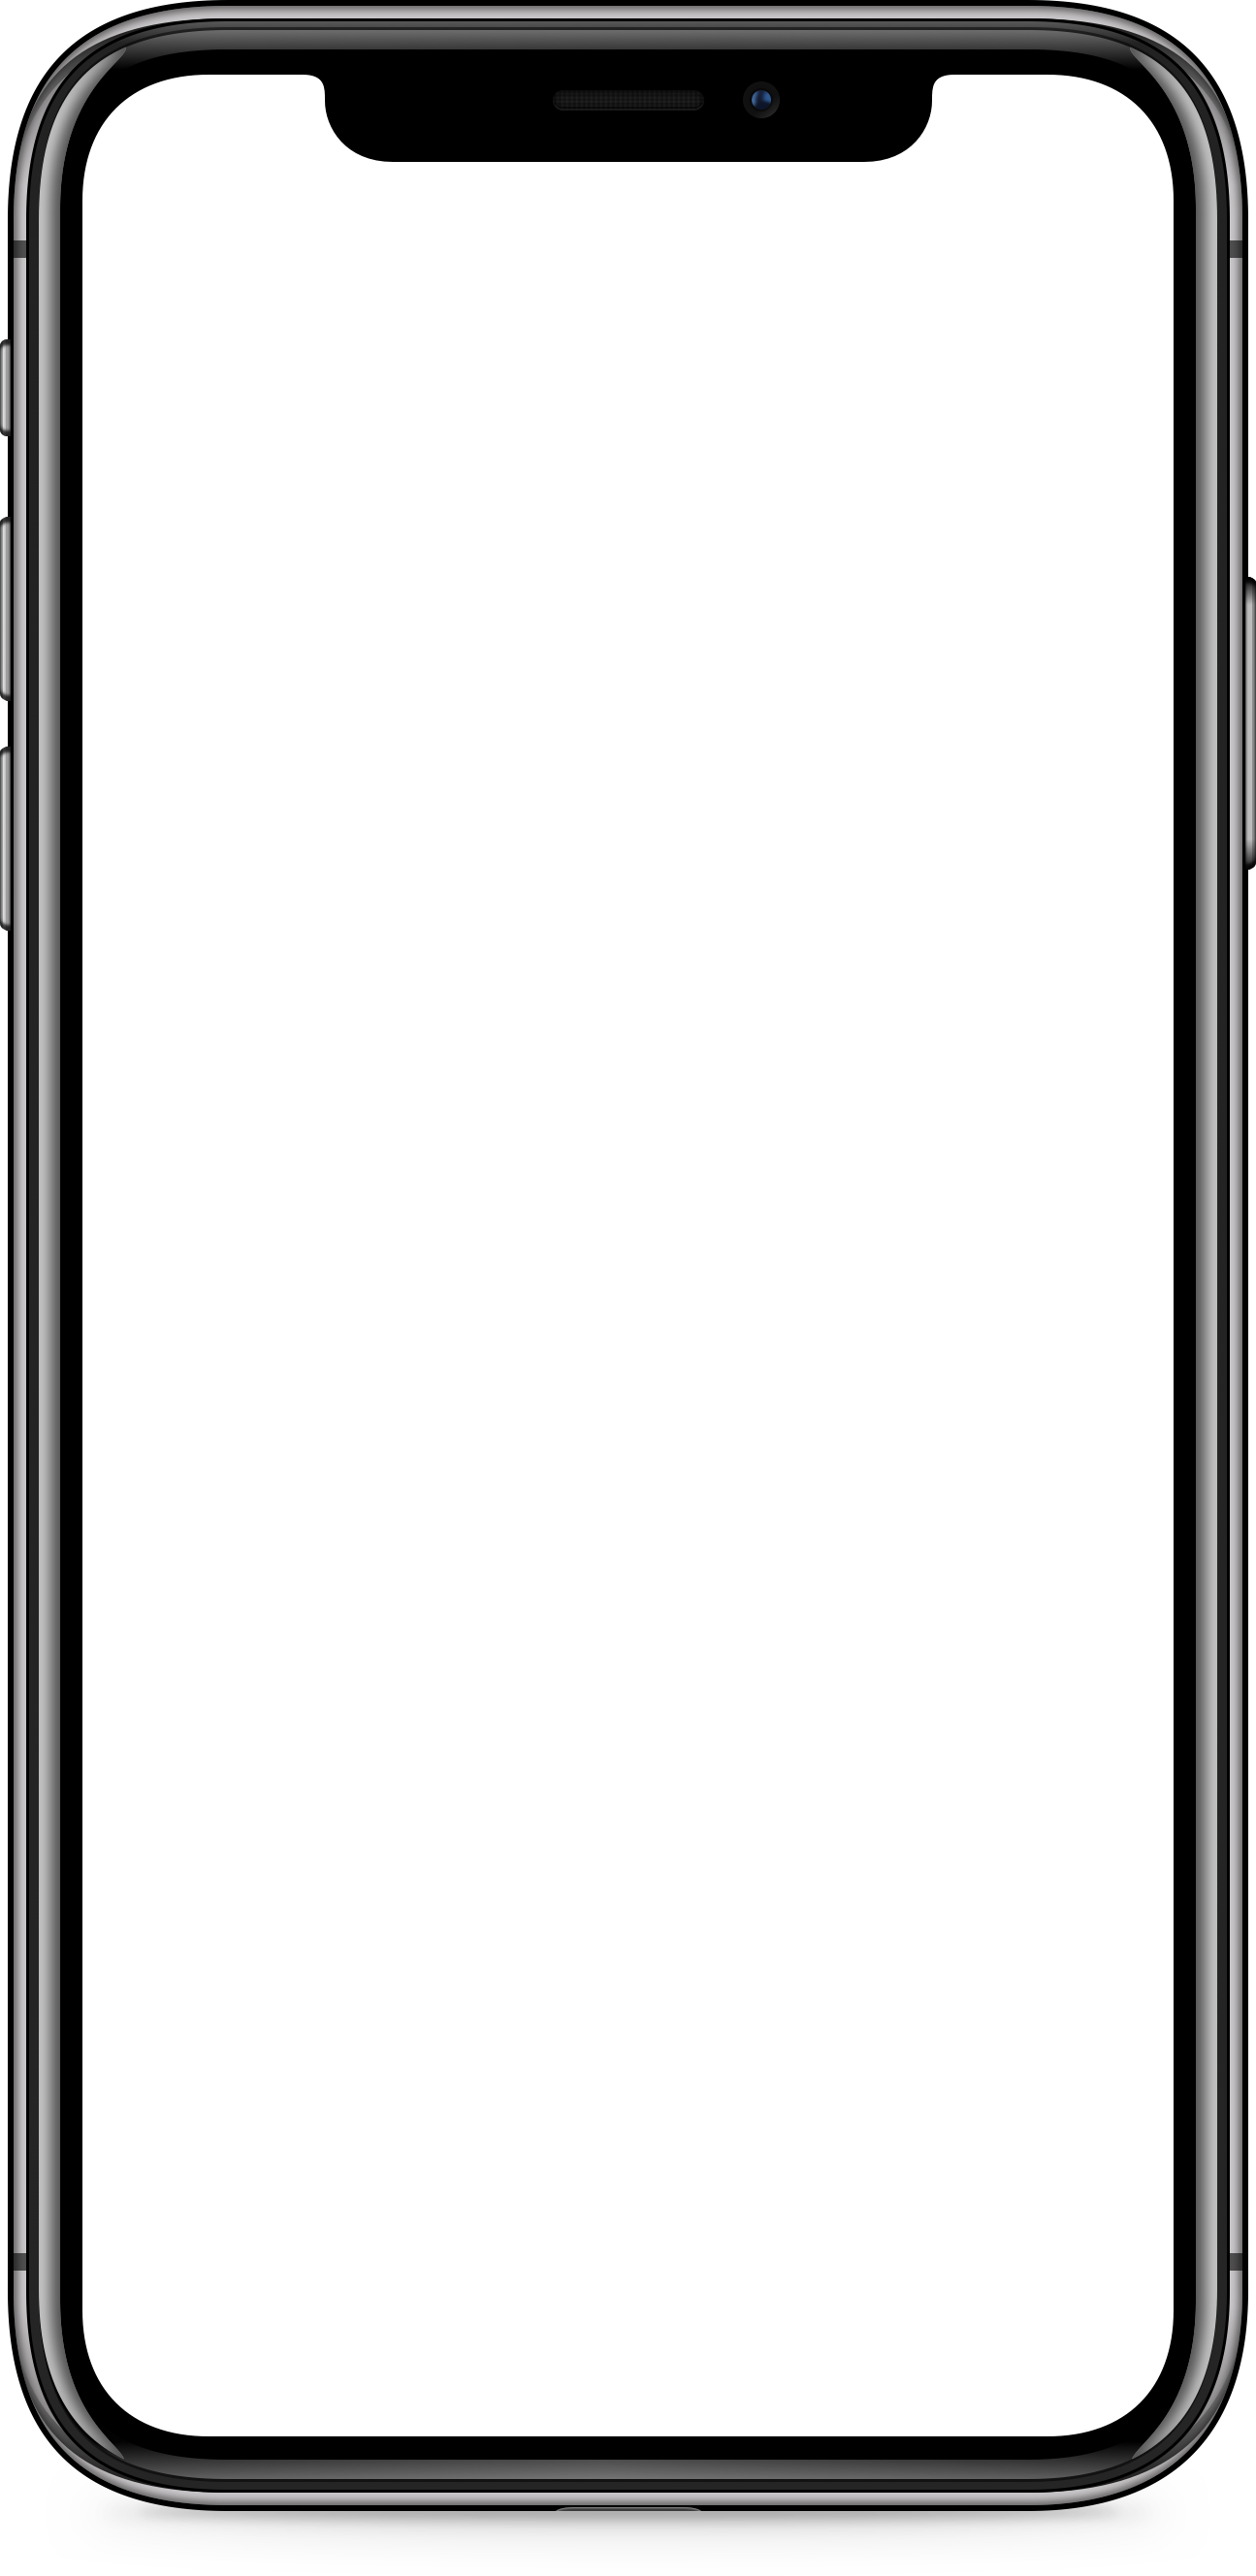 An image of the iPhone X in Space Gray